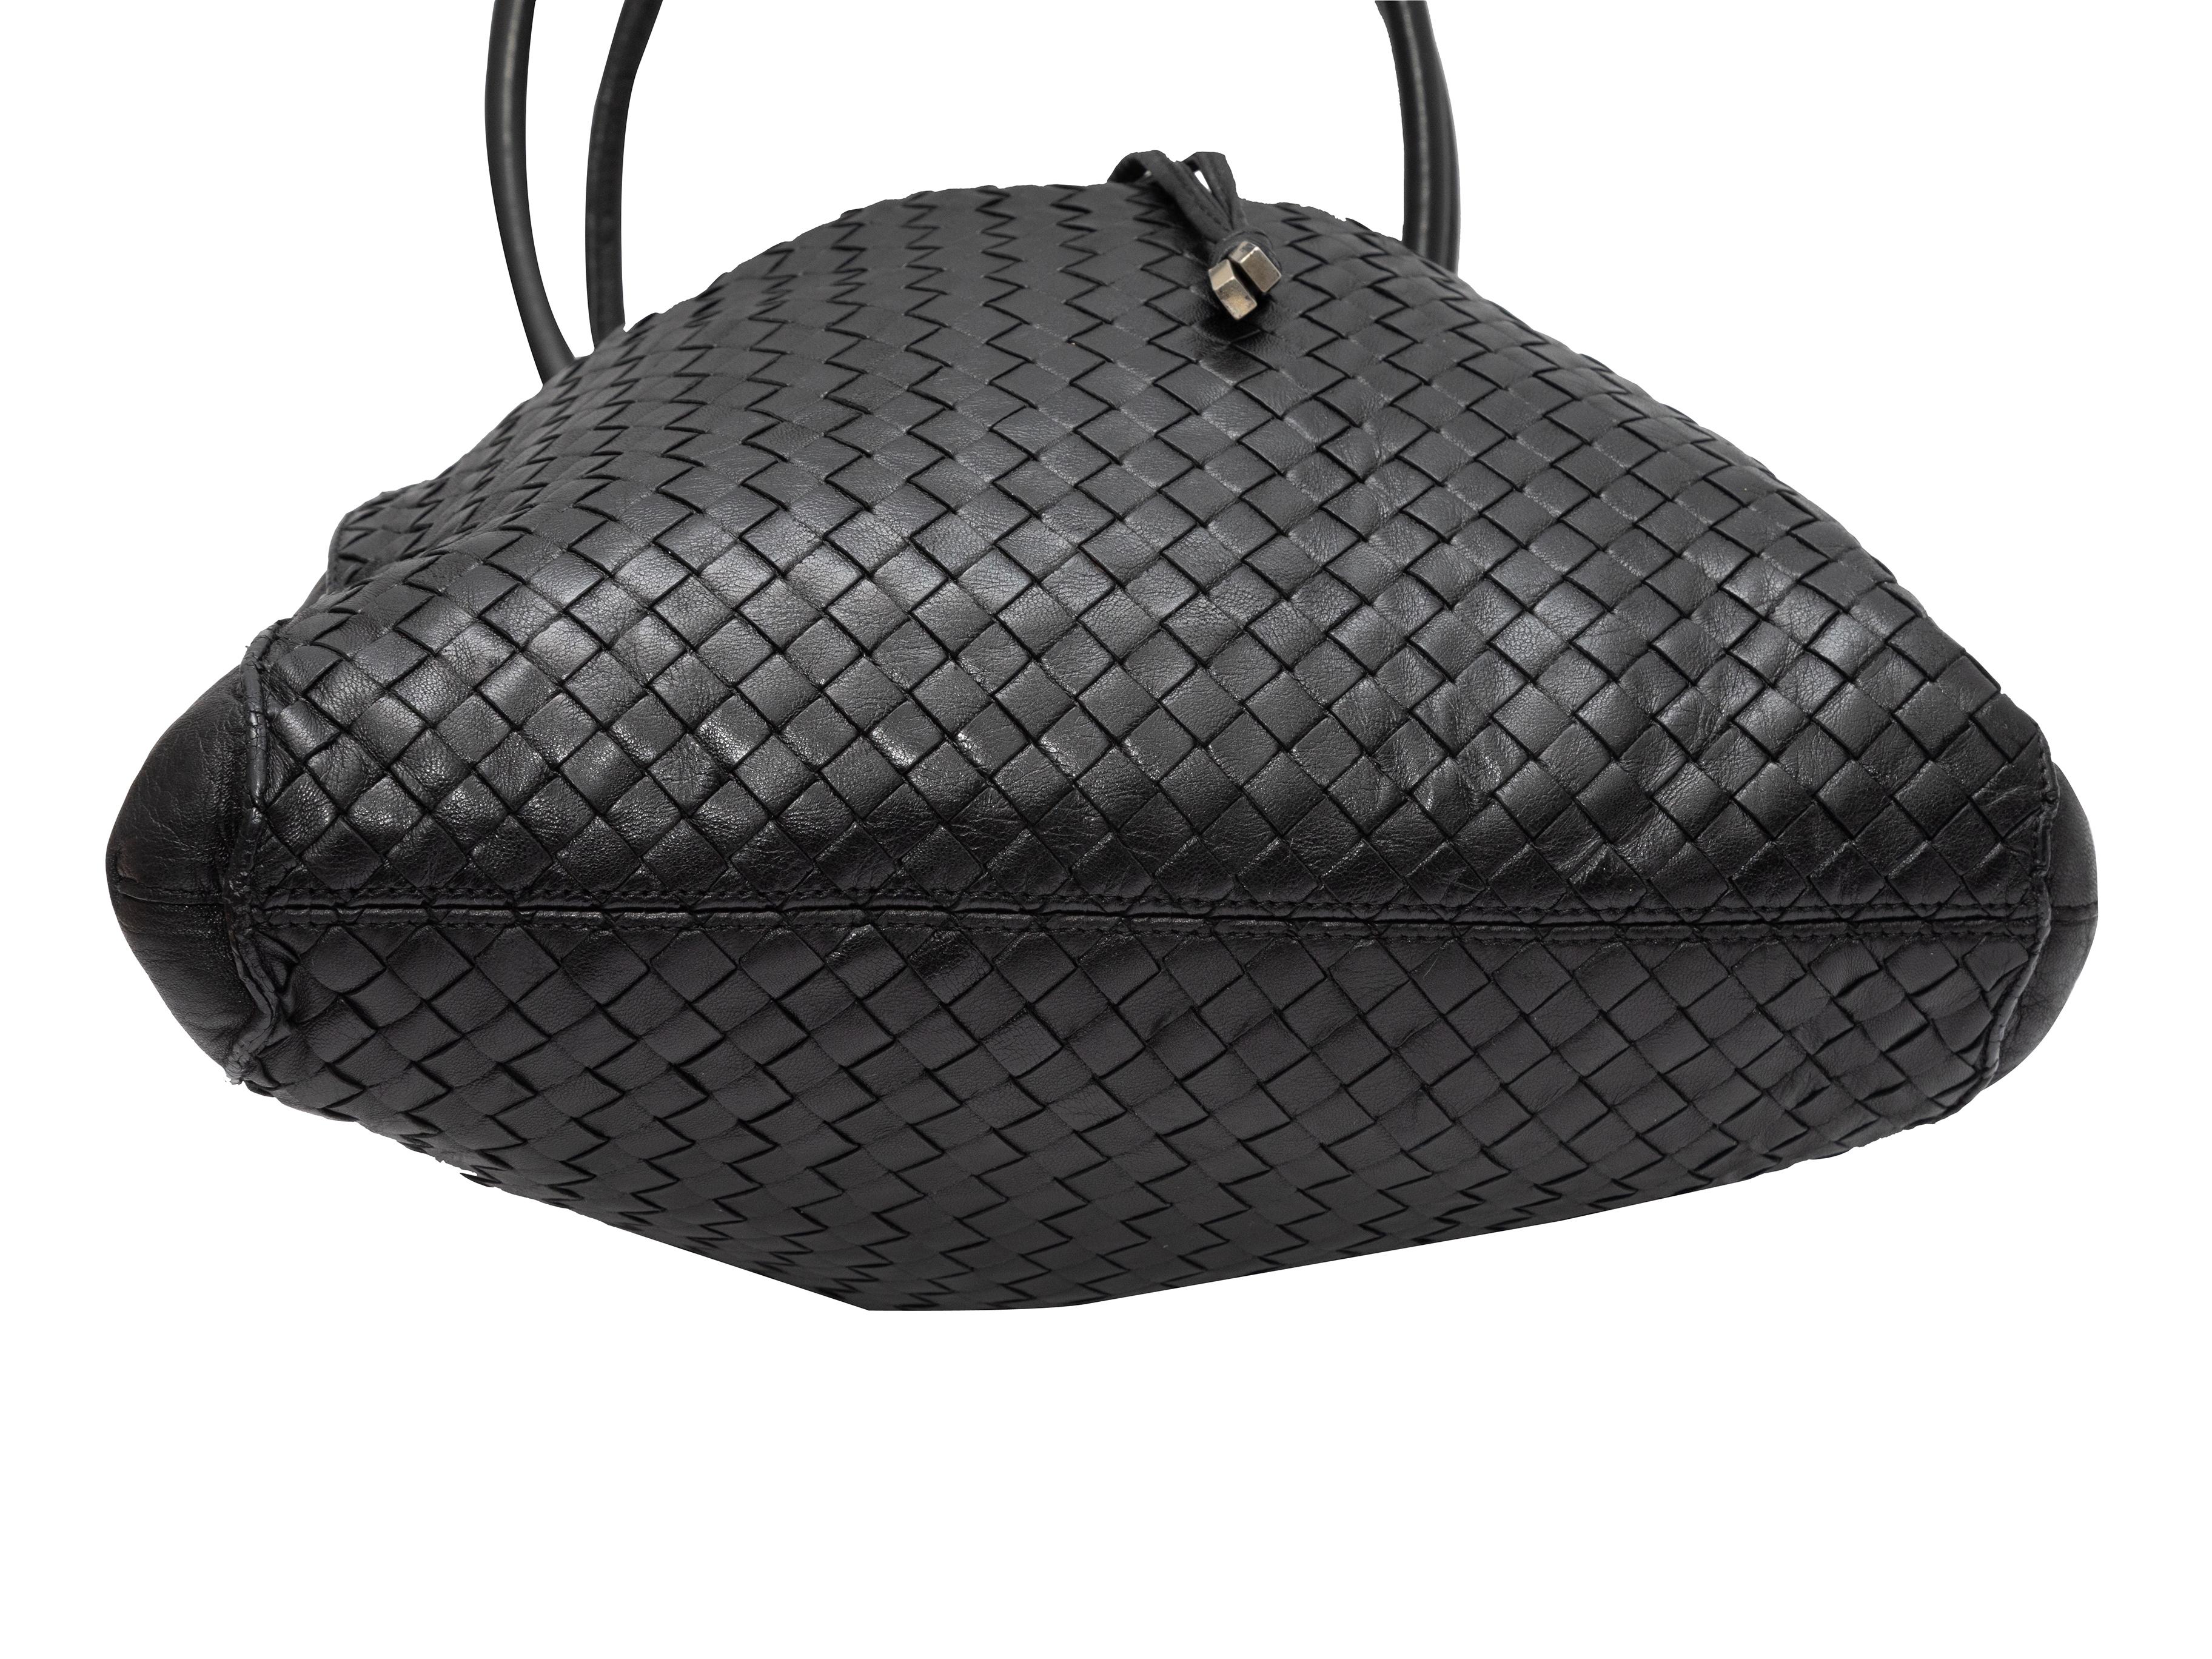 Product Details: Black Bottega Veneta Intrecciato Shoulder Bag. This bag features a woven leather body, gold-tone hardware, dual rolled shoulder straps, and a top drawstring closure. 11.5